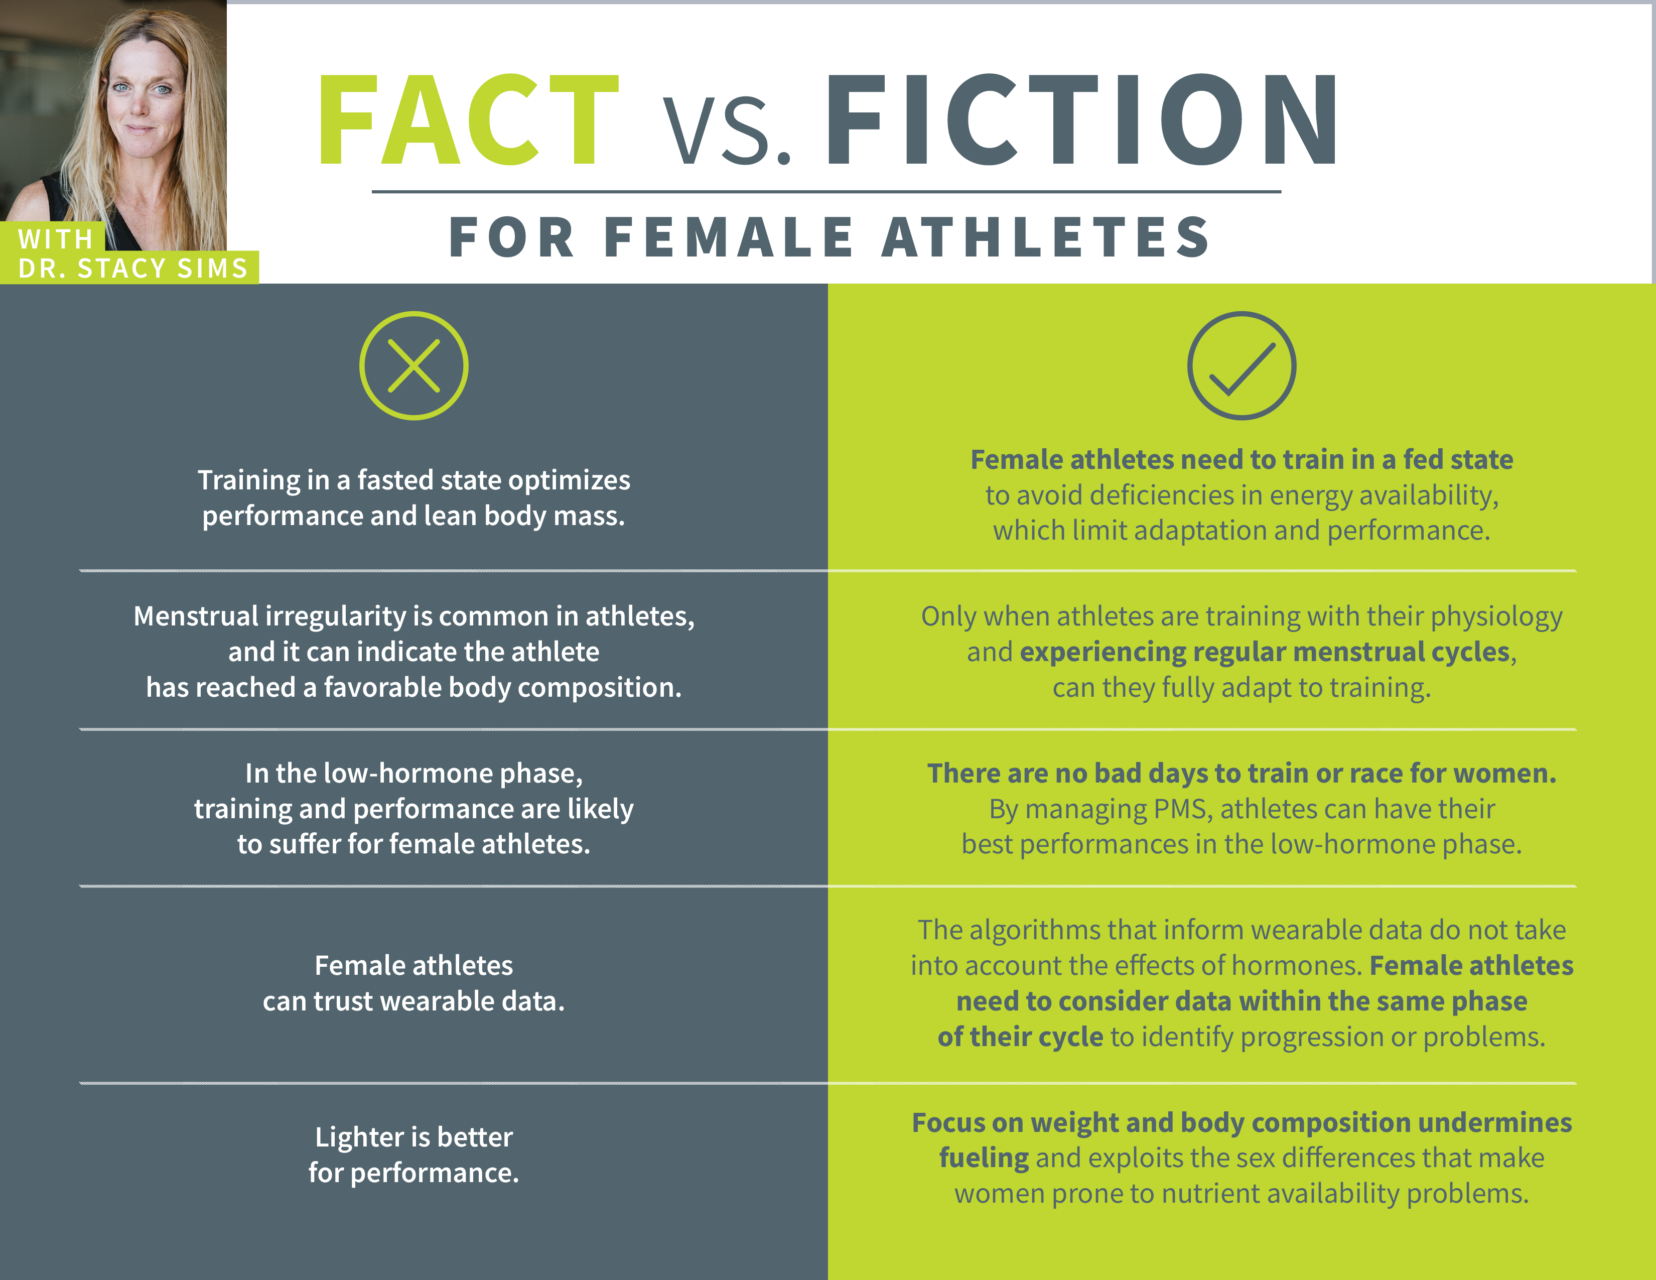 Graphic summarizing the science on training female athletes by Dr. Stacy Sims